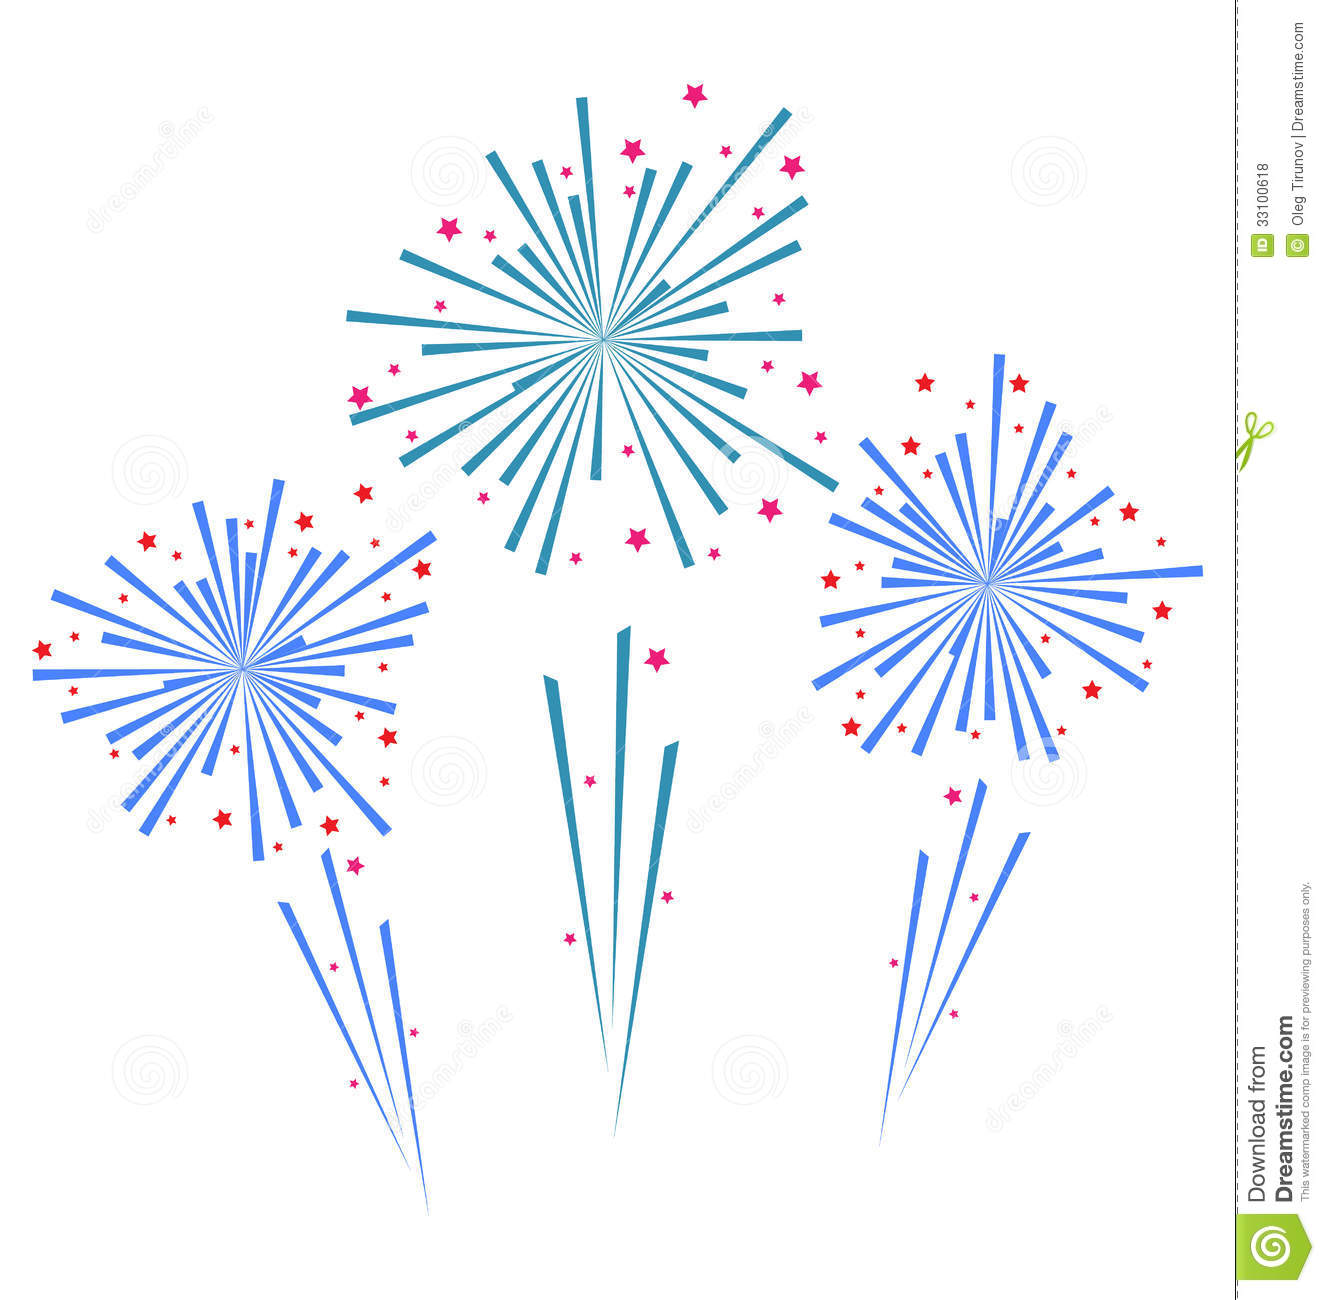 Sketch Abstract Colorful Exploding Firework Royalty Free Stock Photos    